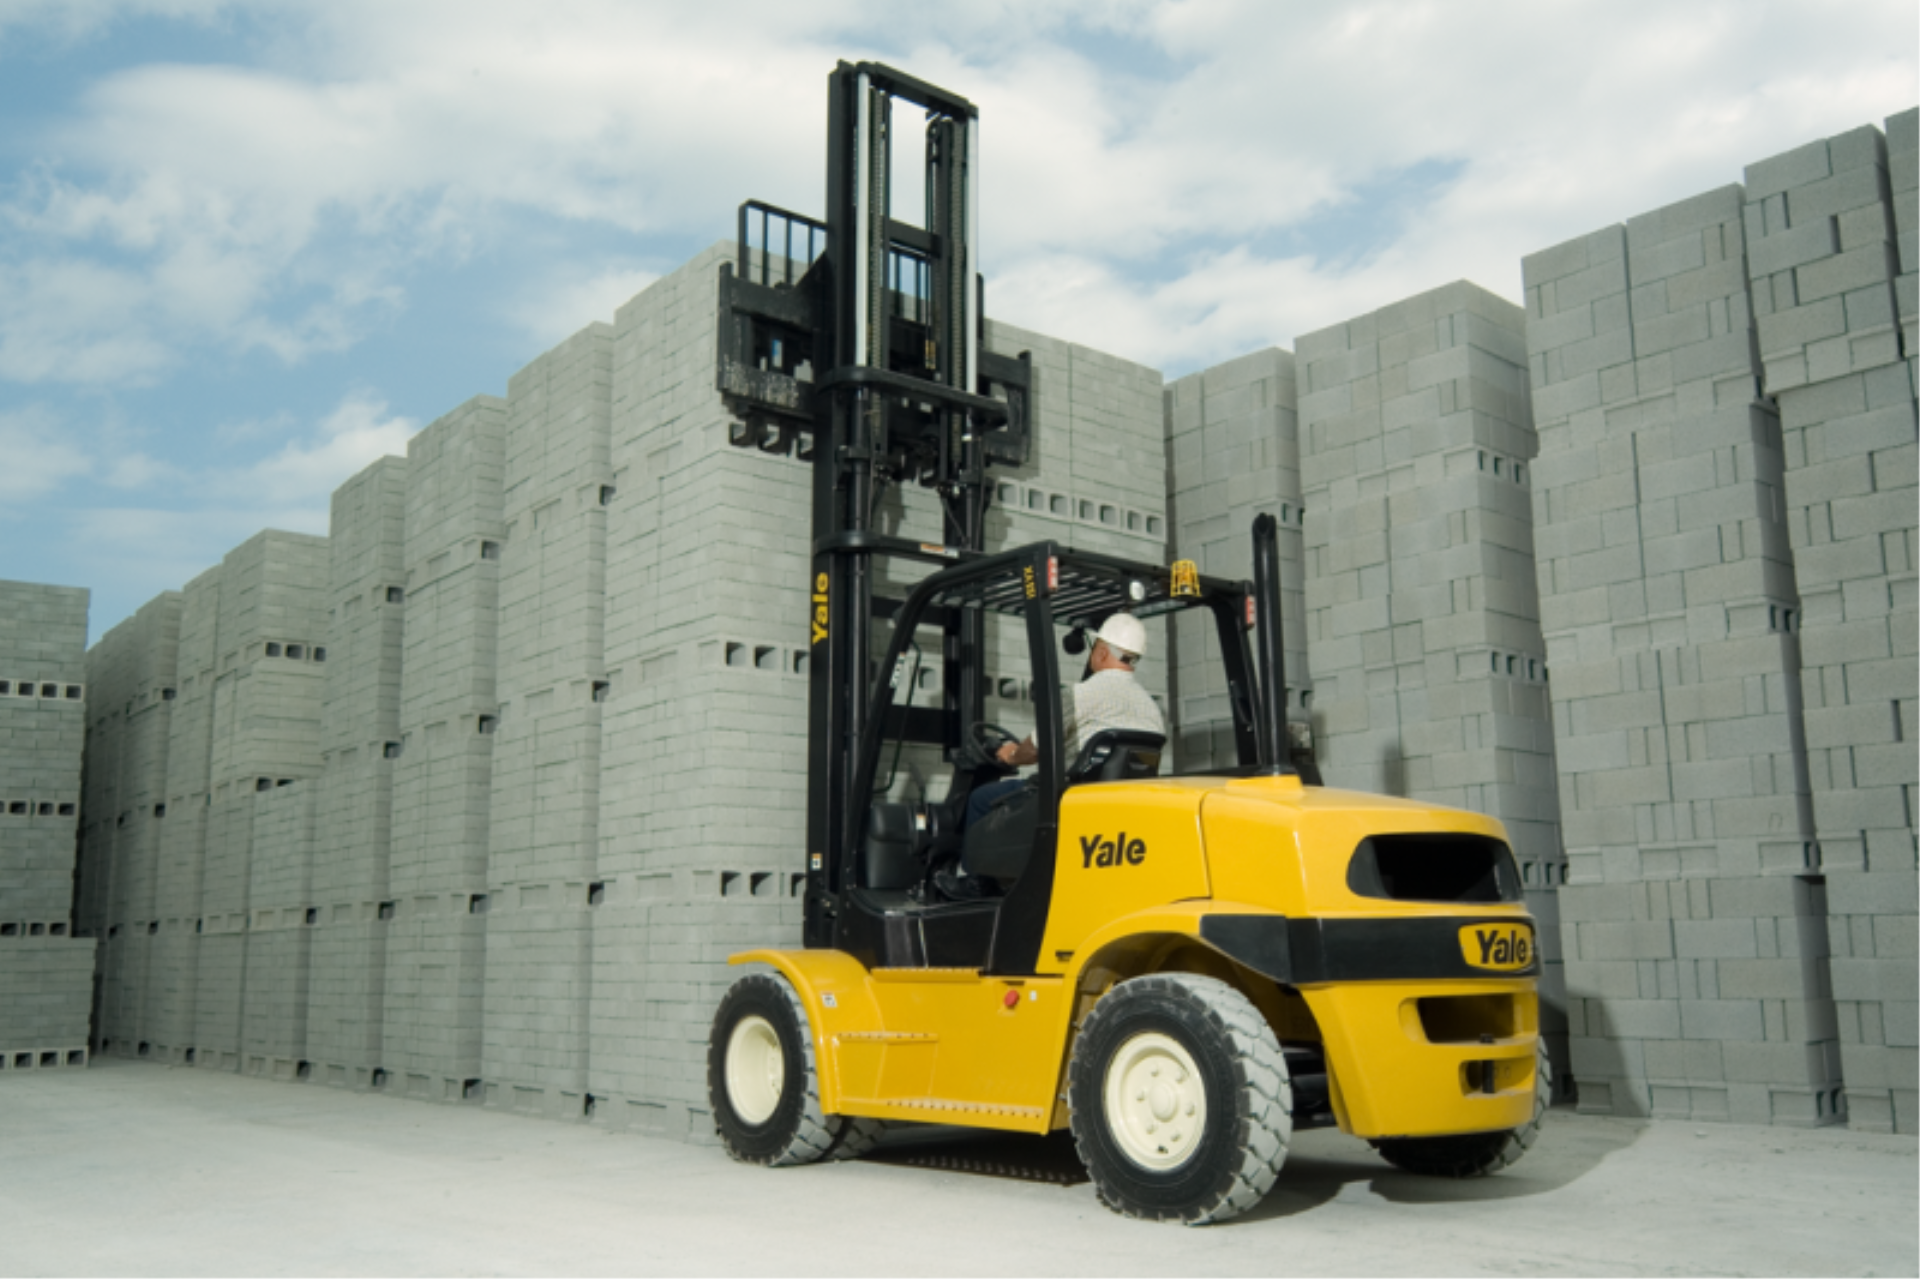 The production site is also a place where forklifts are often used